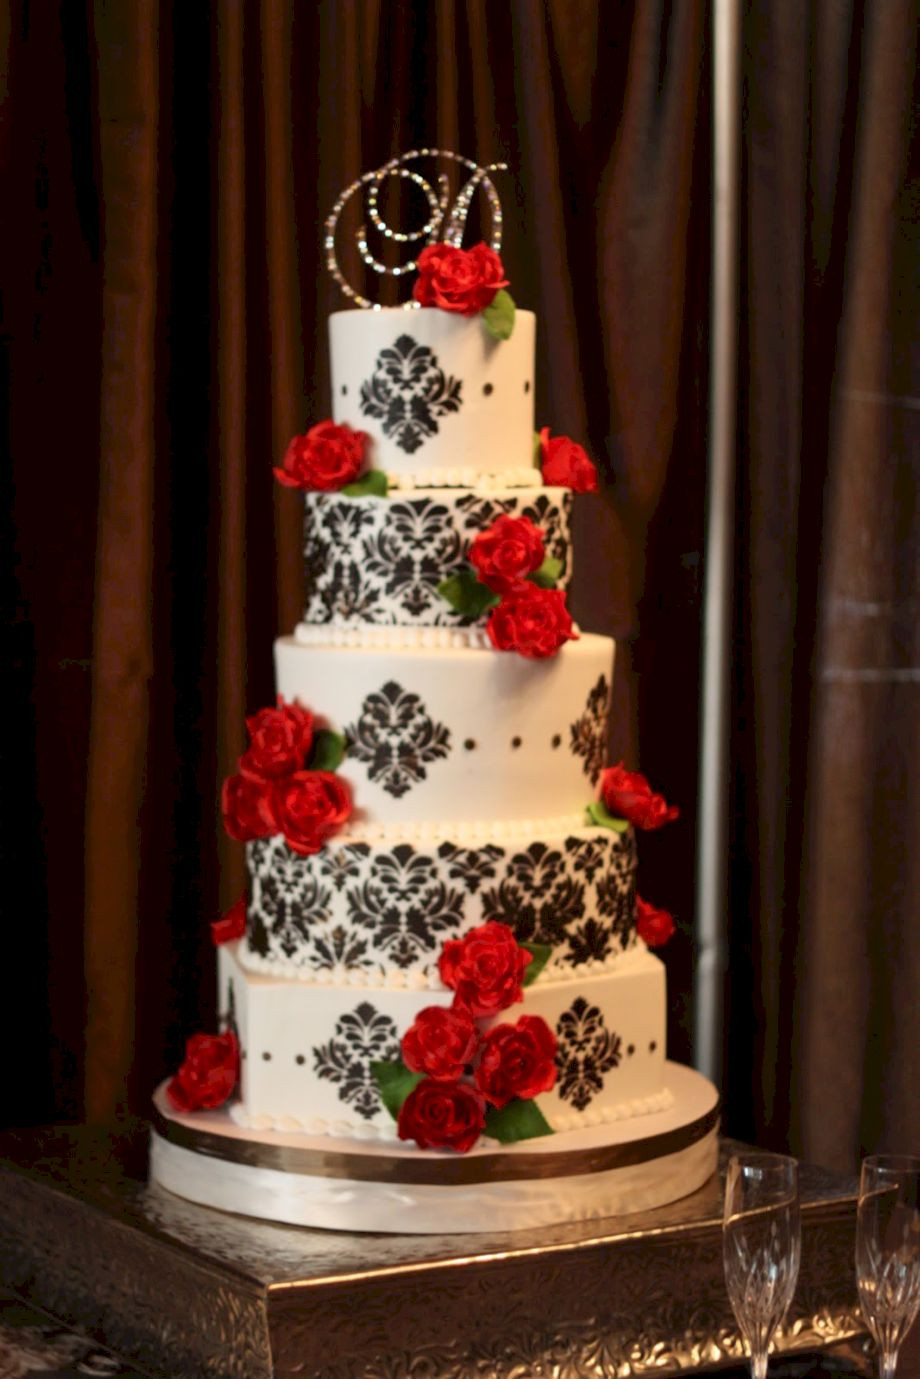 Red Black White Wedding Cakes
 Red black and white wedding cakes 3 VIs Wed